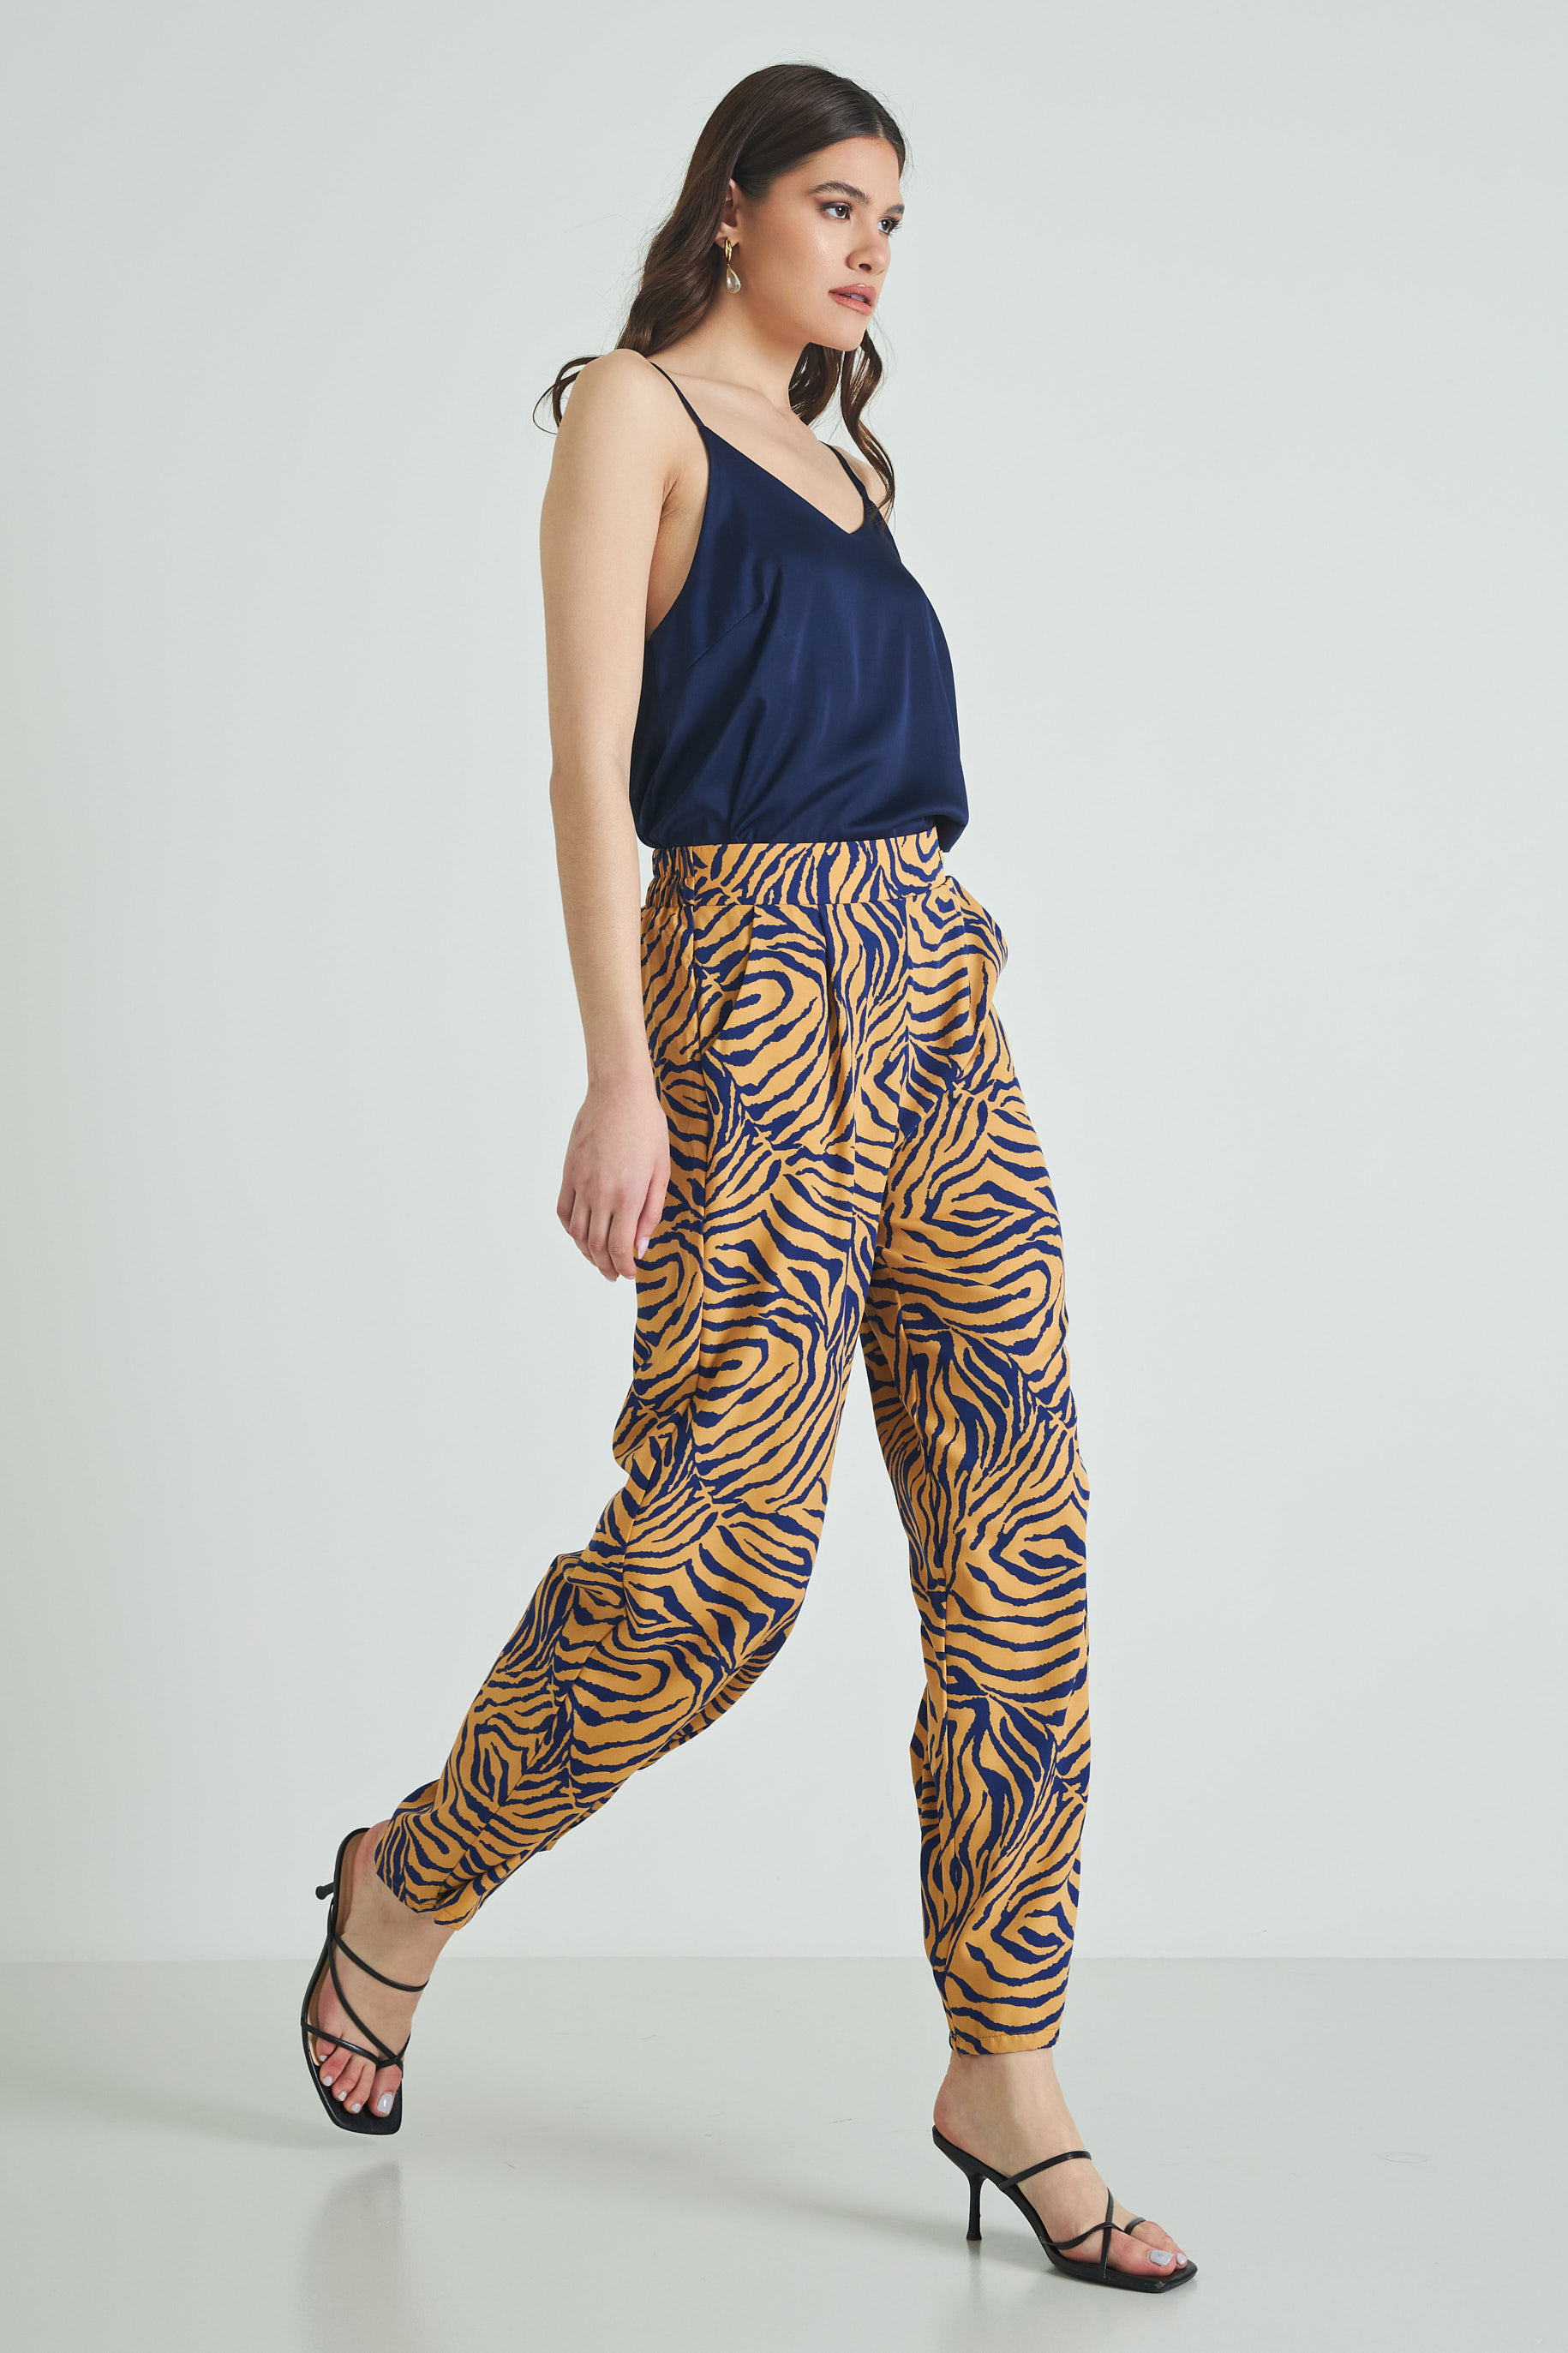 Picture of Animal print pants with pockets